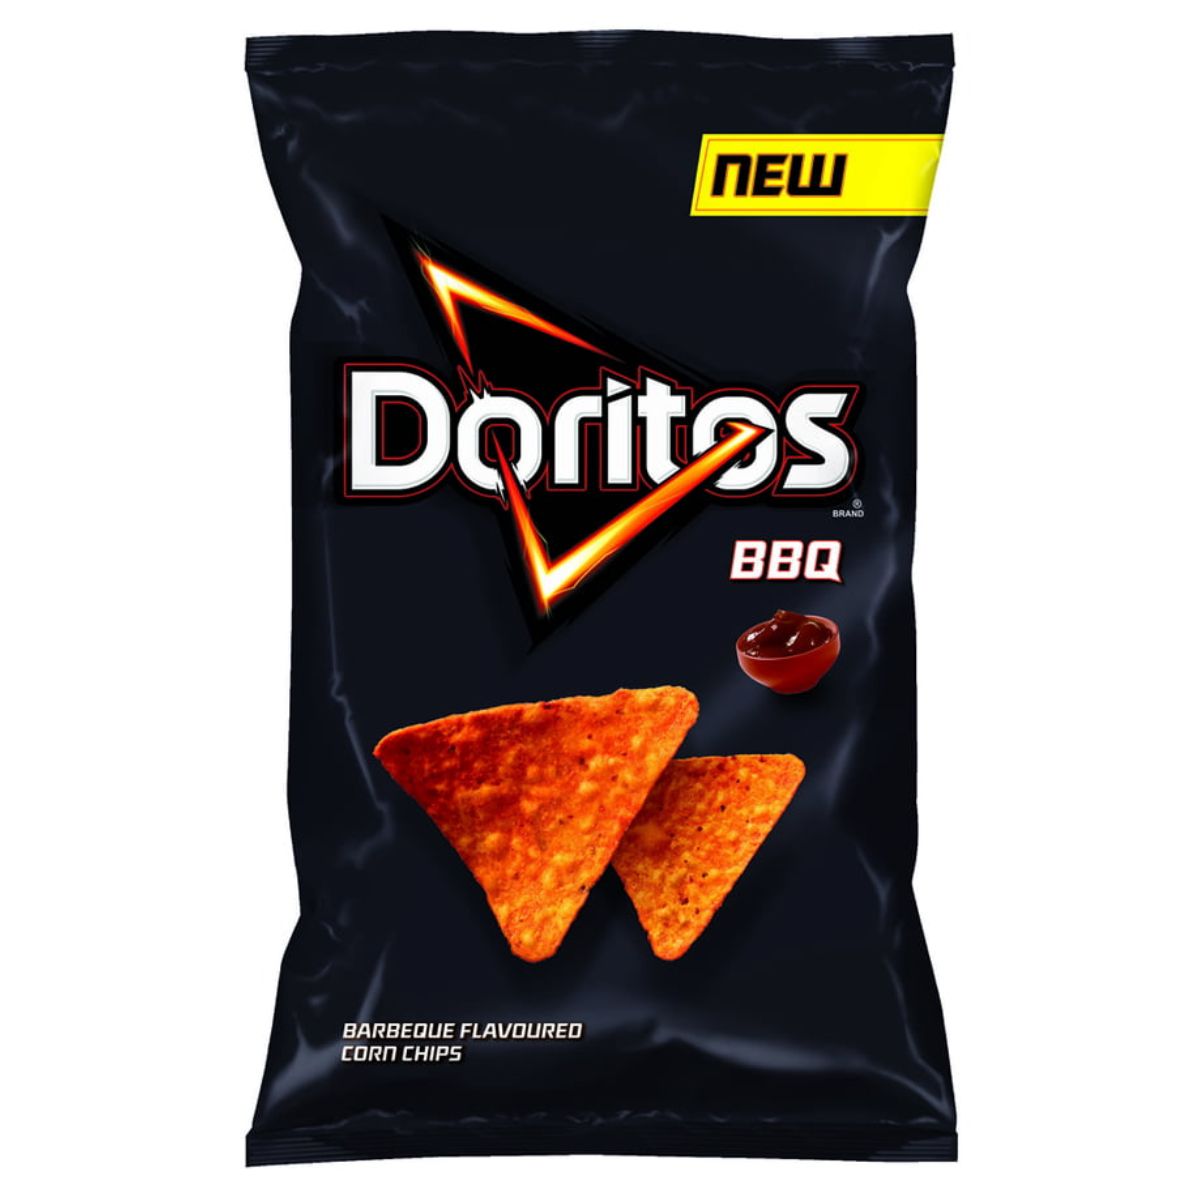 A bag of Doritos - Barbecue - 100g on a white background.